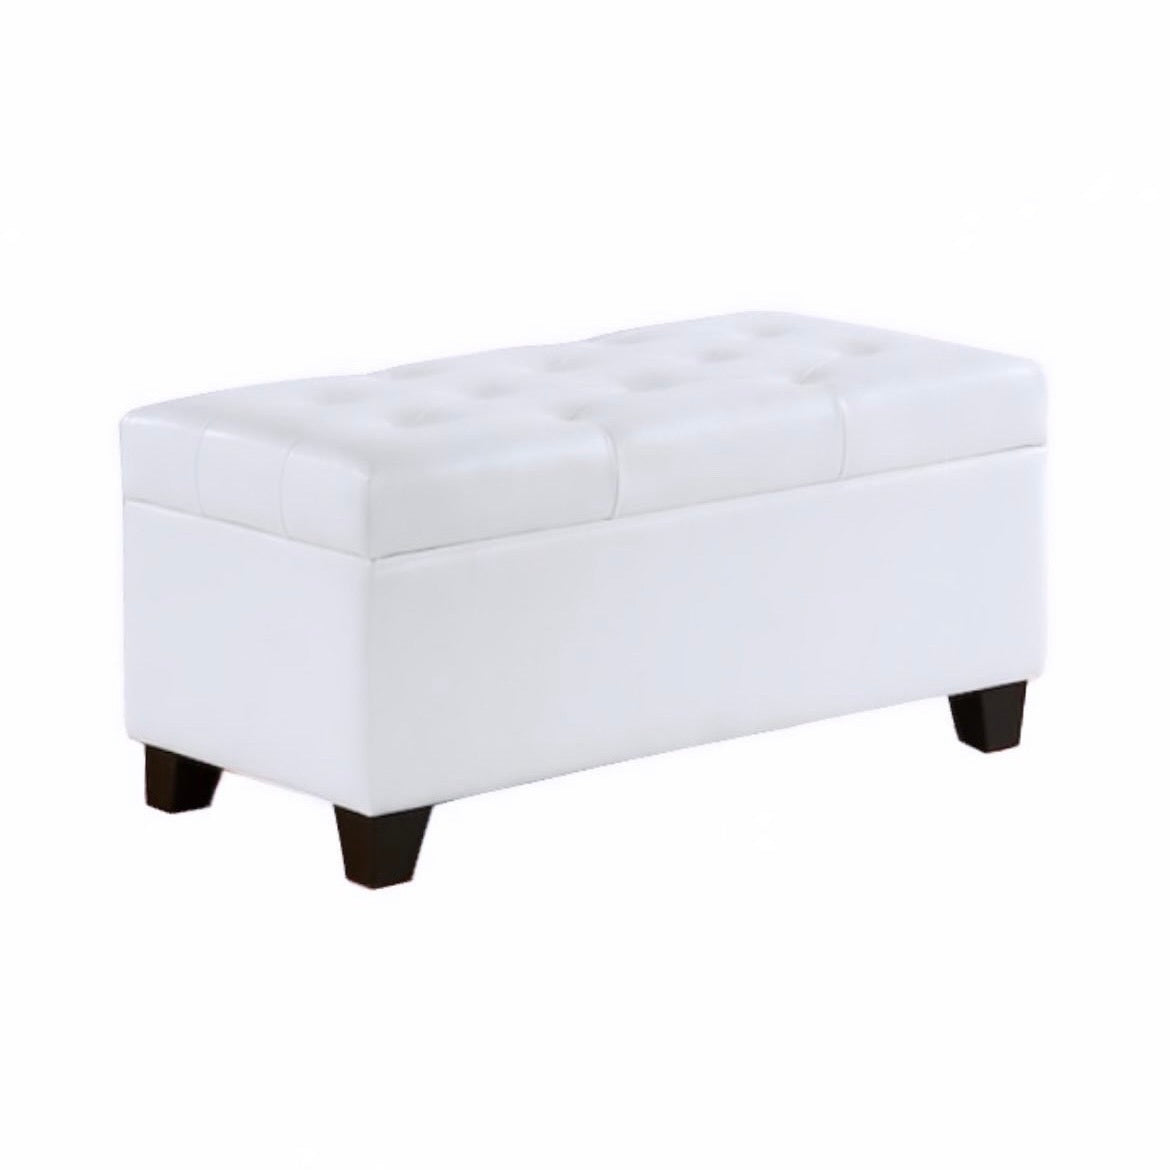 IMPERIAL WHITE BENCH